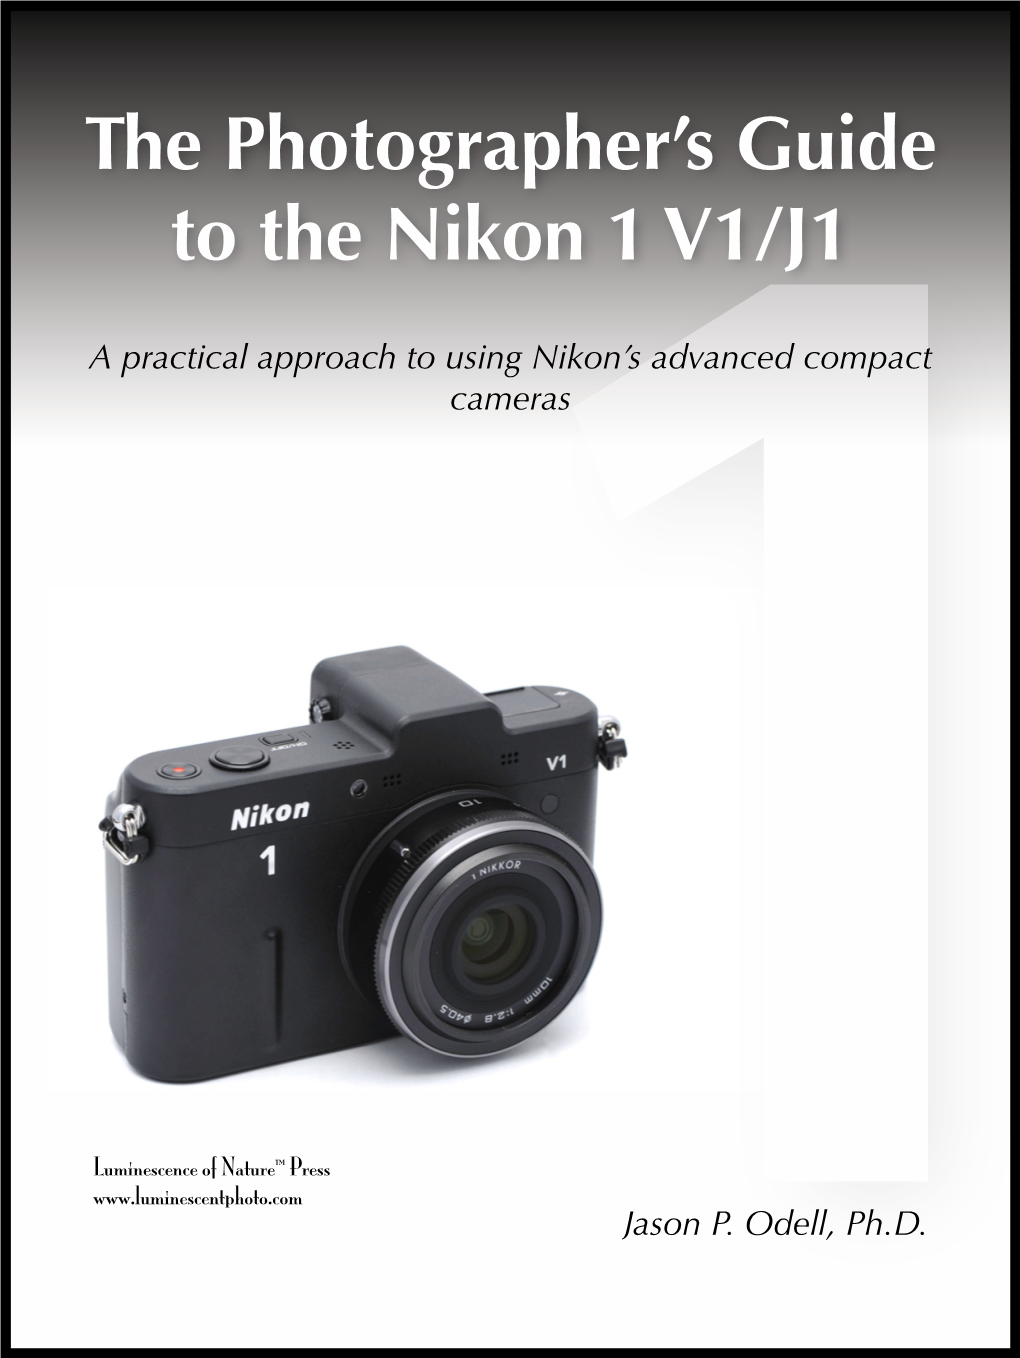 The Photographer's Guide to the Nikon 1 V1/J1